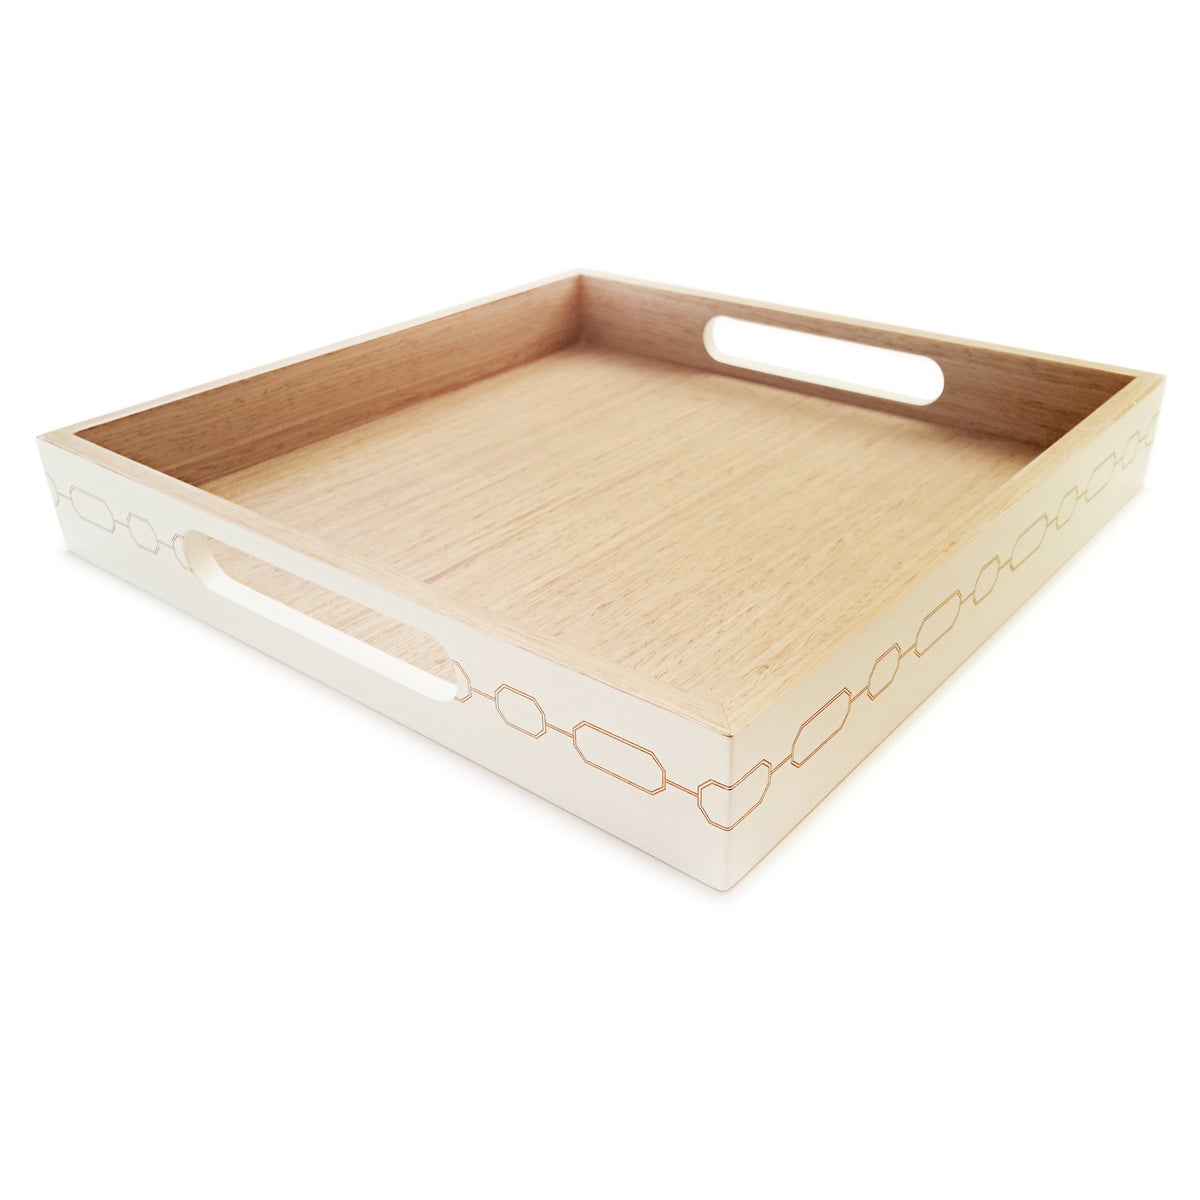 Norma Square Nesting Trays (2) in White